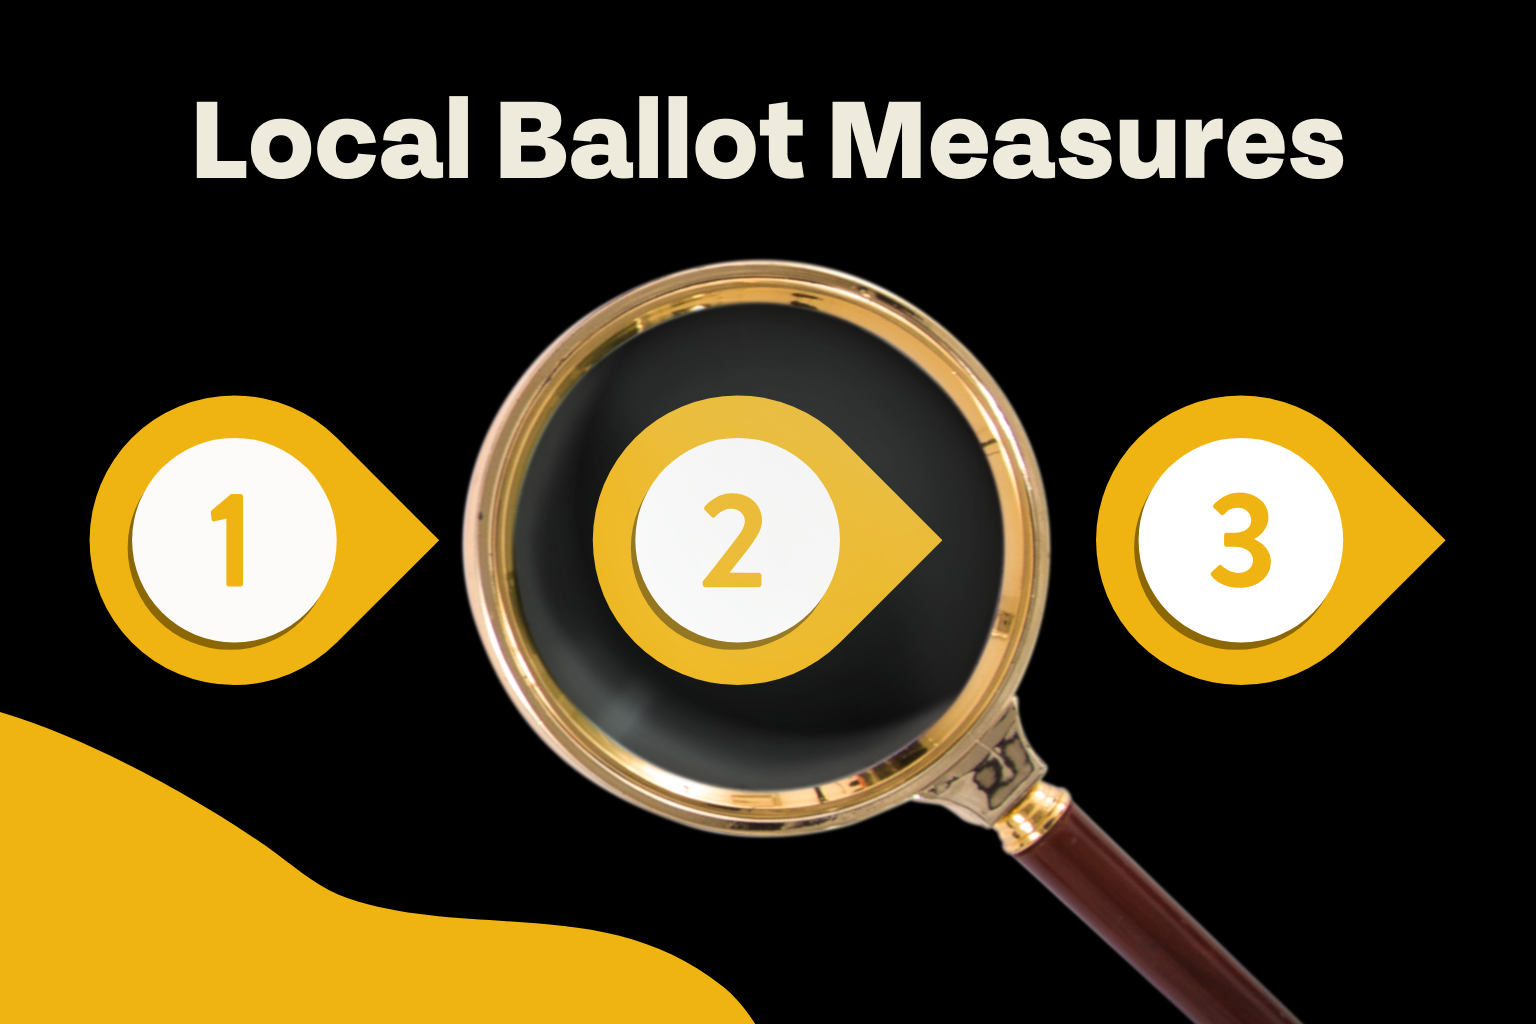 A magnifying glass focusing on local ballot measures, symbolized by numbered icons, examines these pivotal local ballot measures in detail.